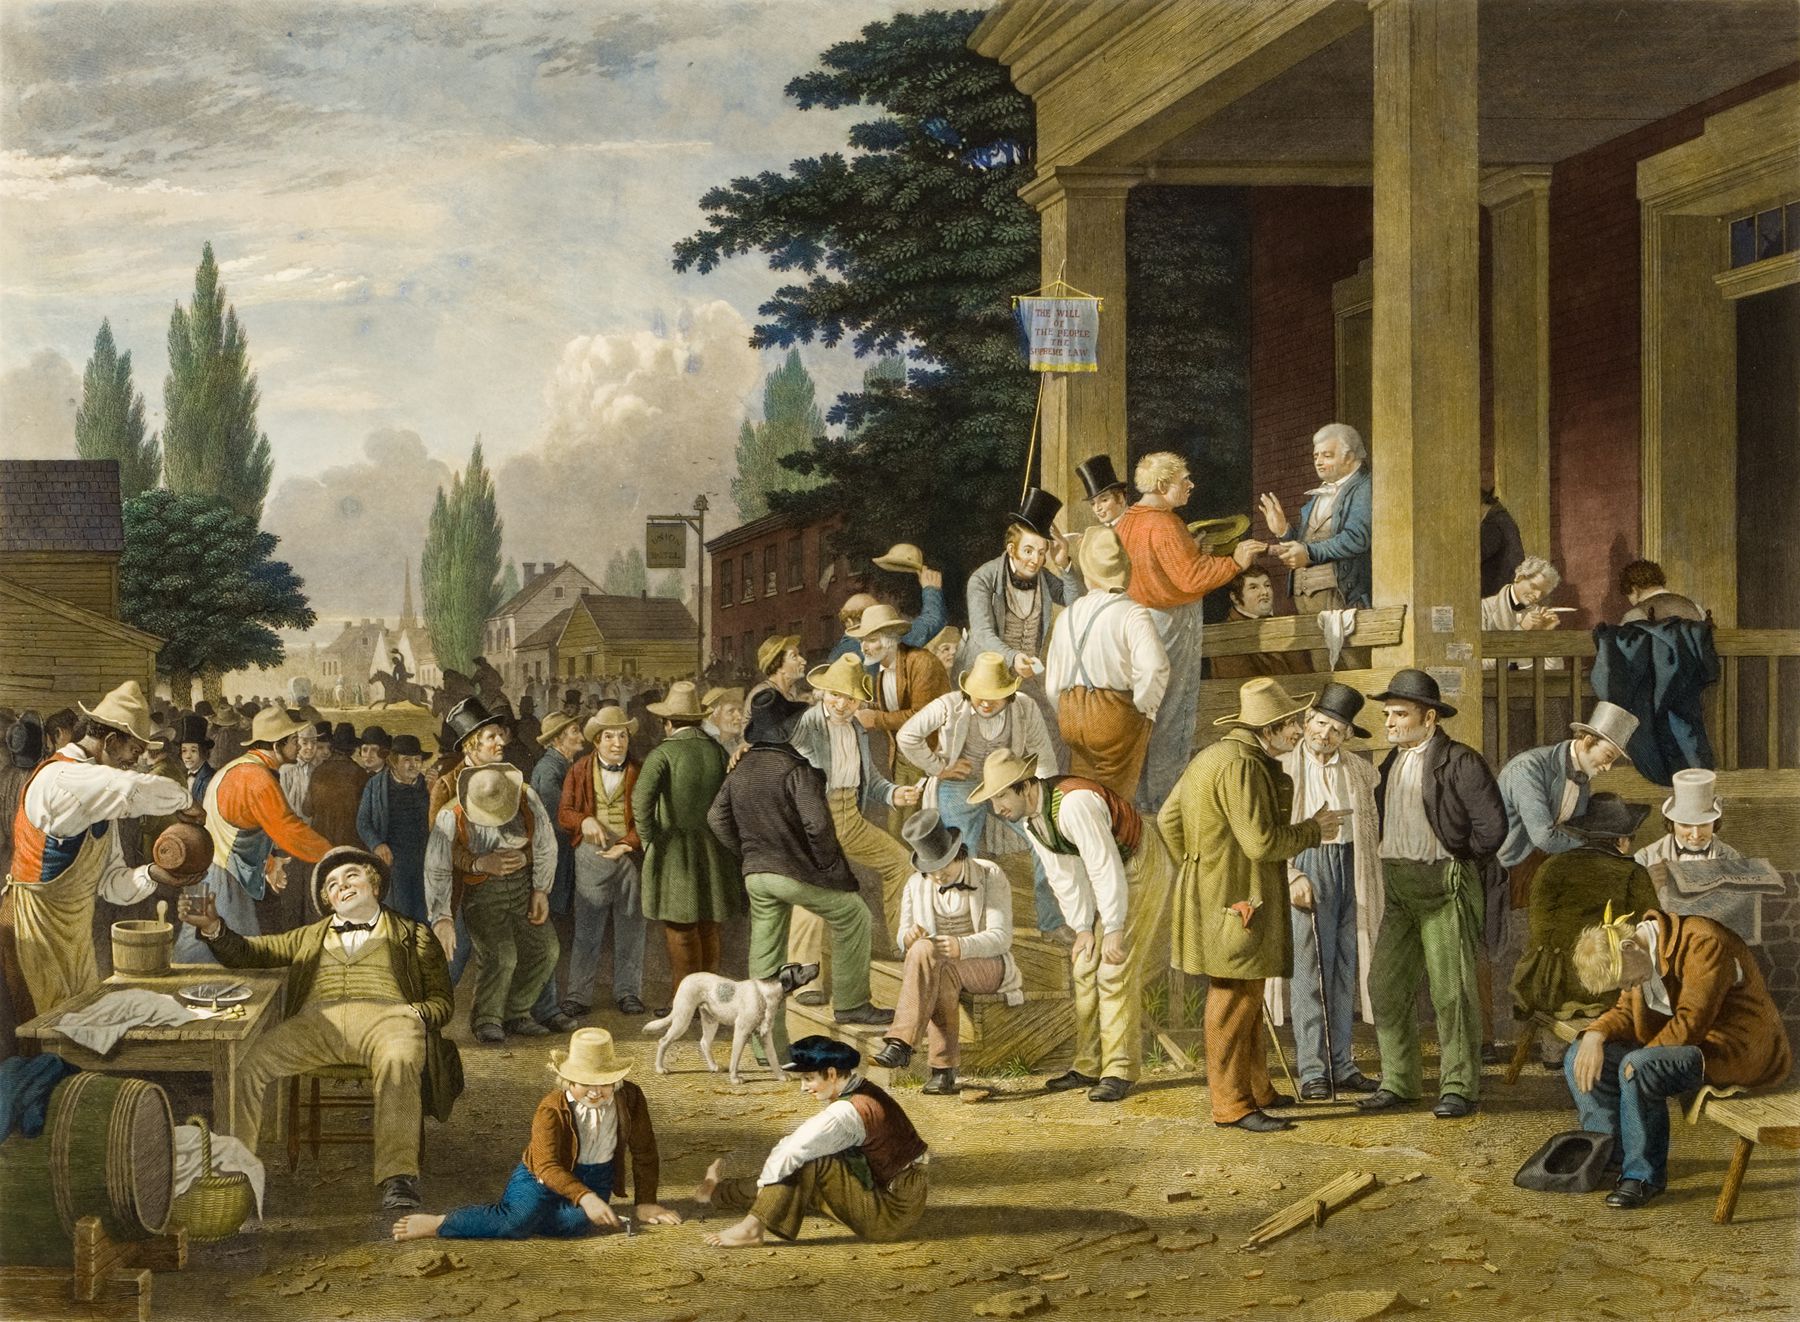 George Caleb Bingham’s painting The County Election in 1852